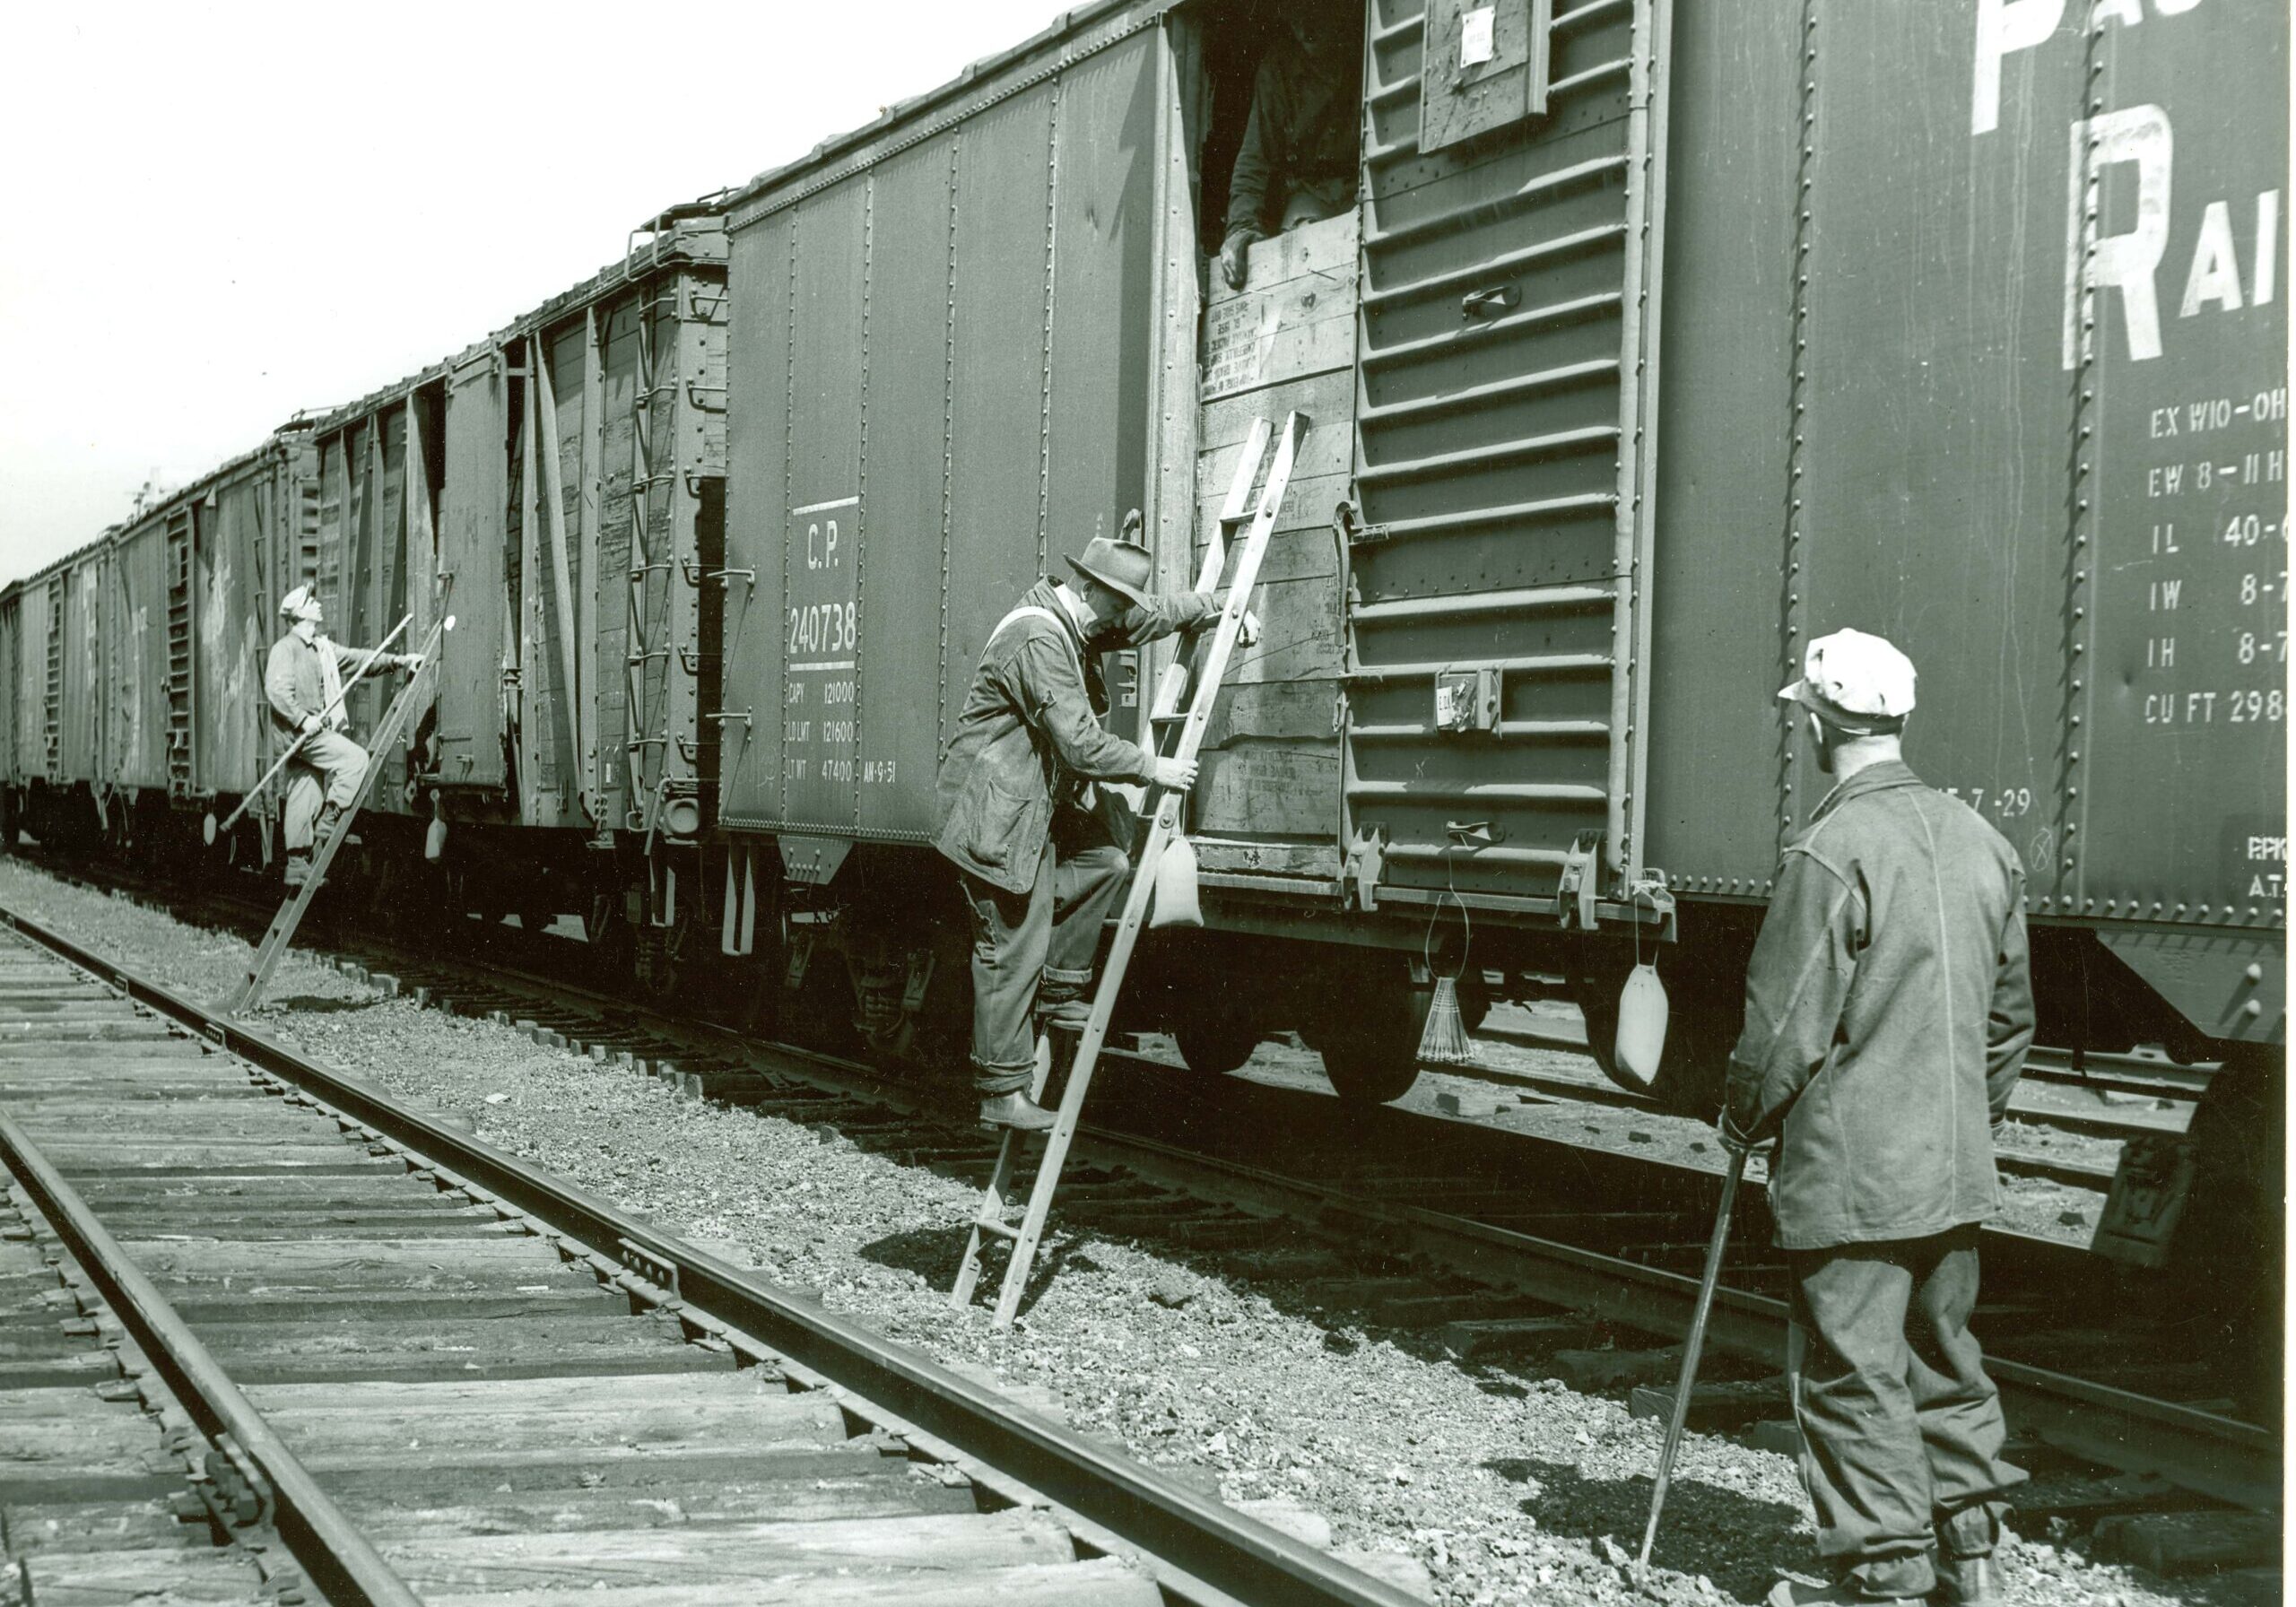 Canadian Grain Commission Samplers Entering Grain Cars showing boxcar doors scan0025-min